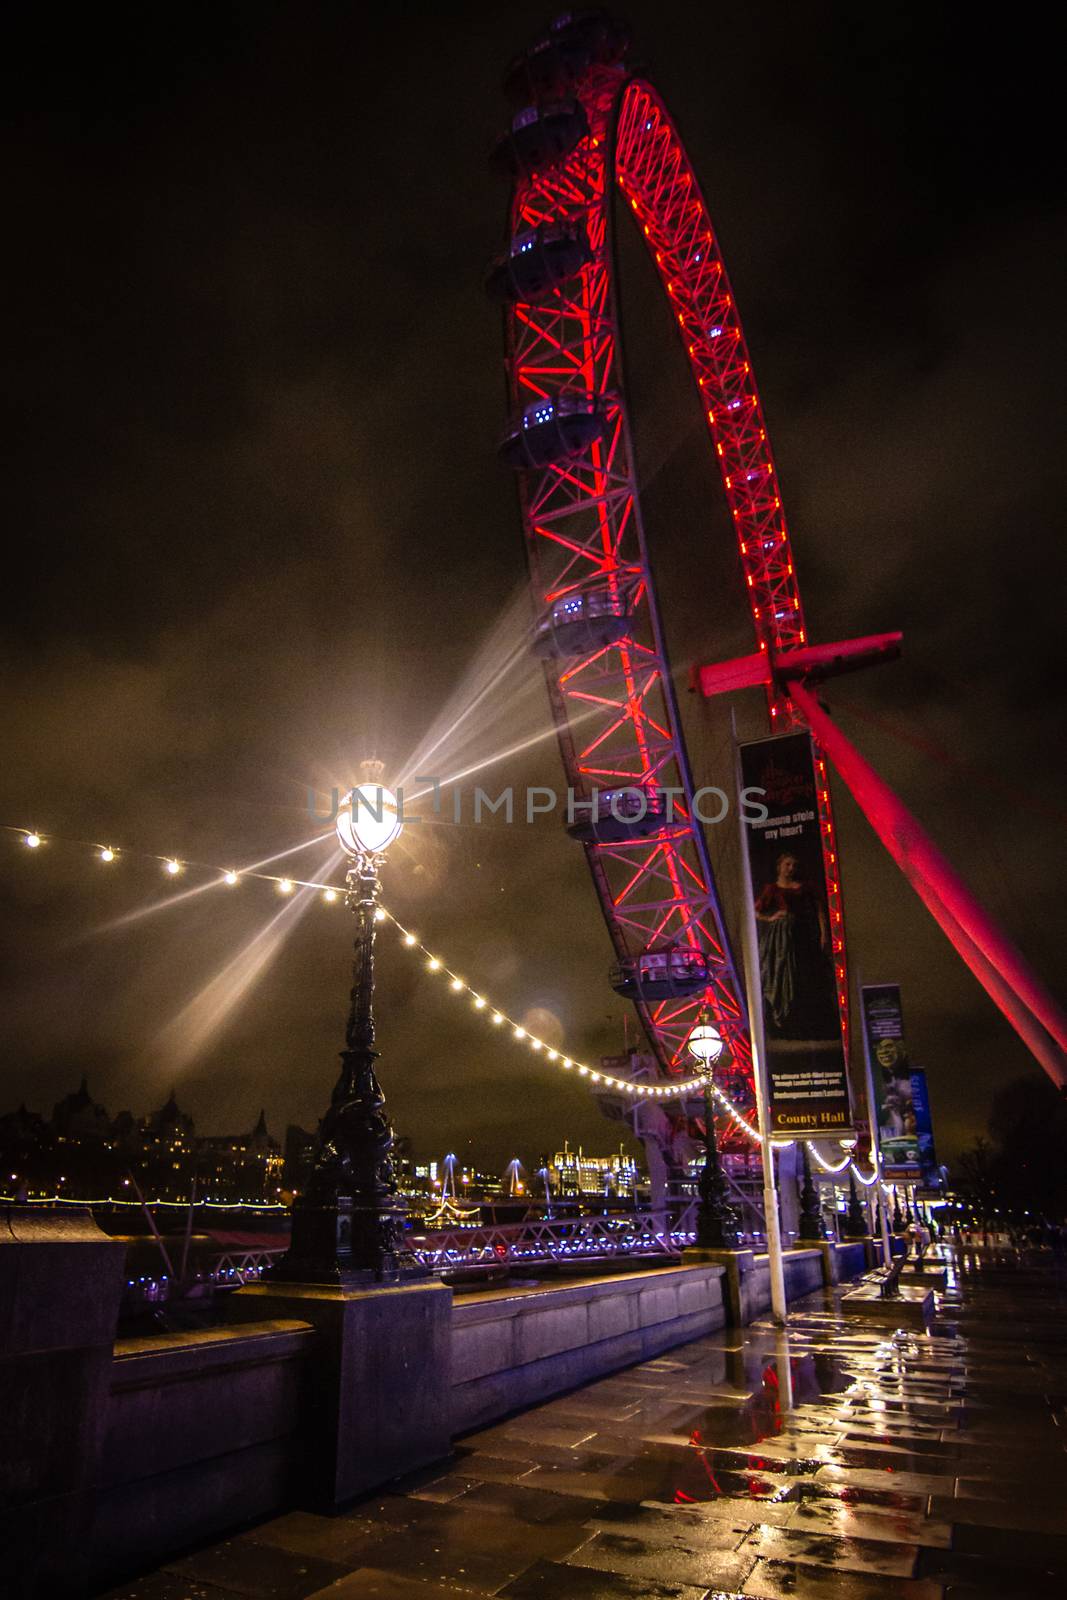 The London Eye illuminated at night in red